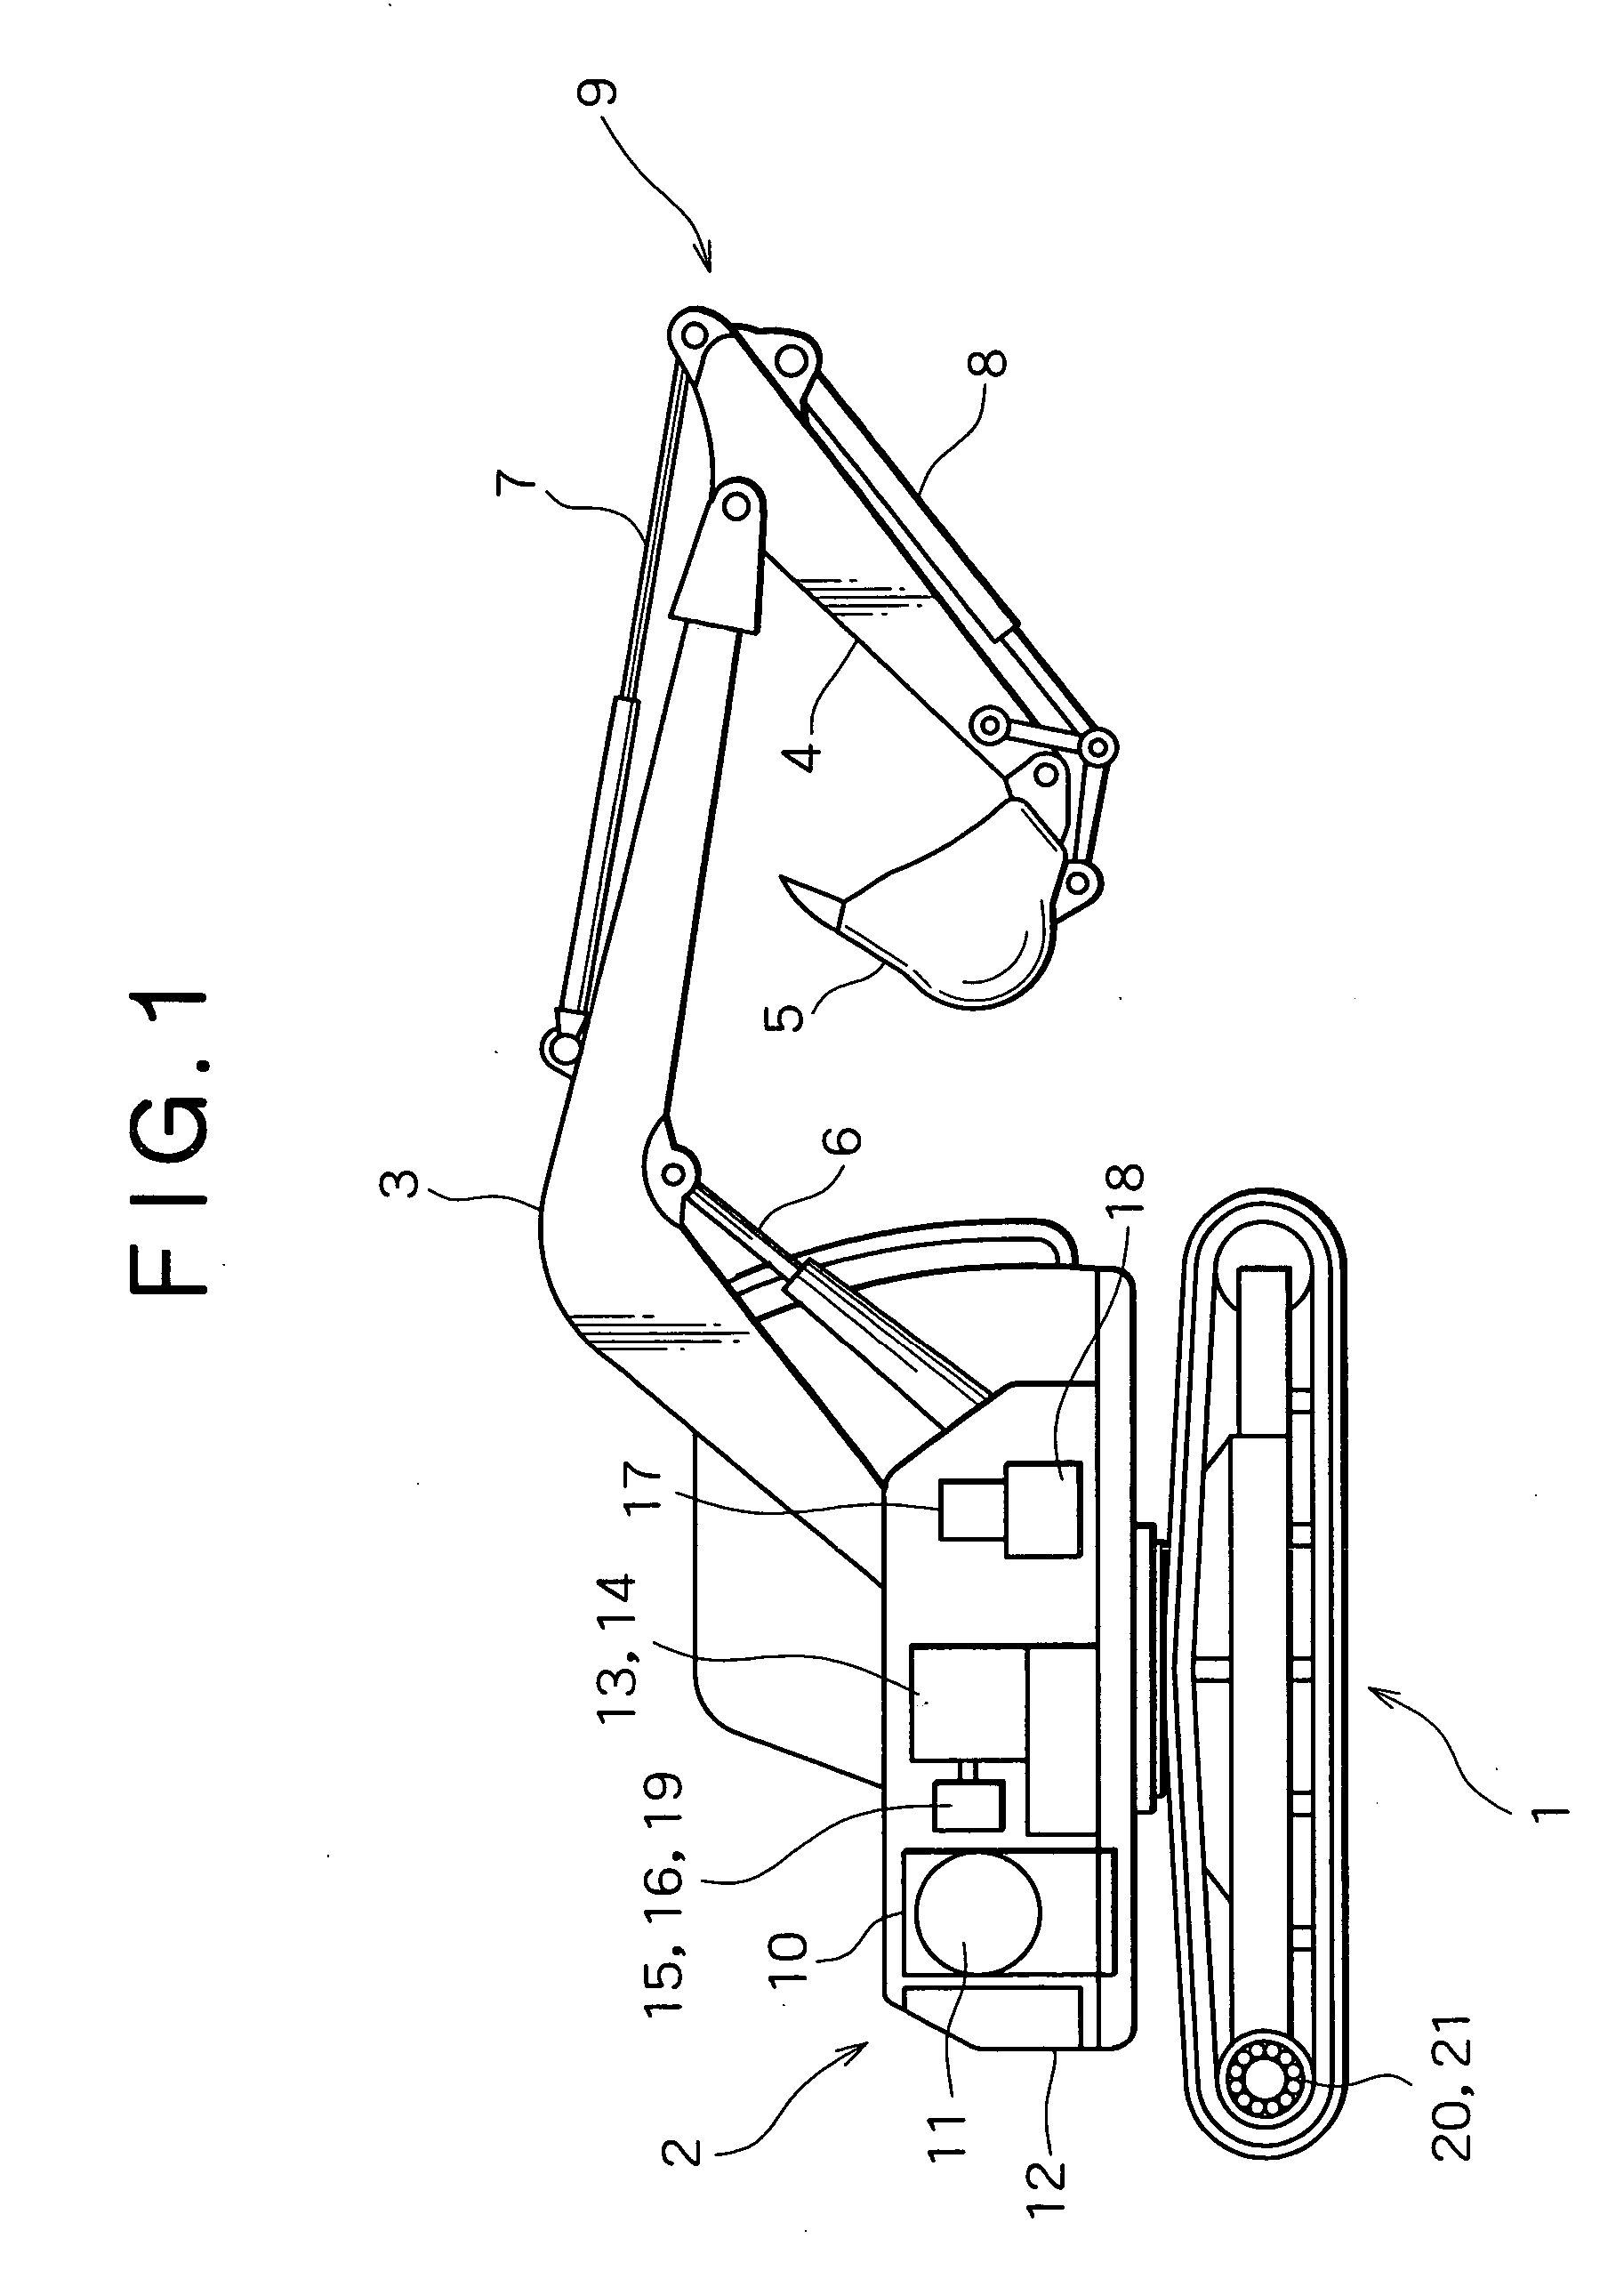 Actuator driving device of working machine